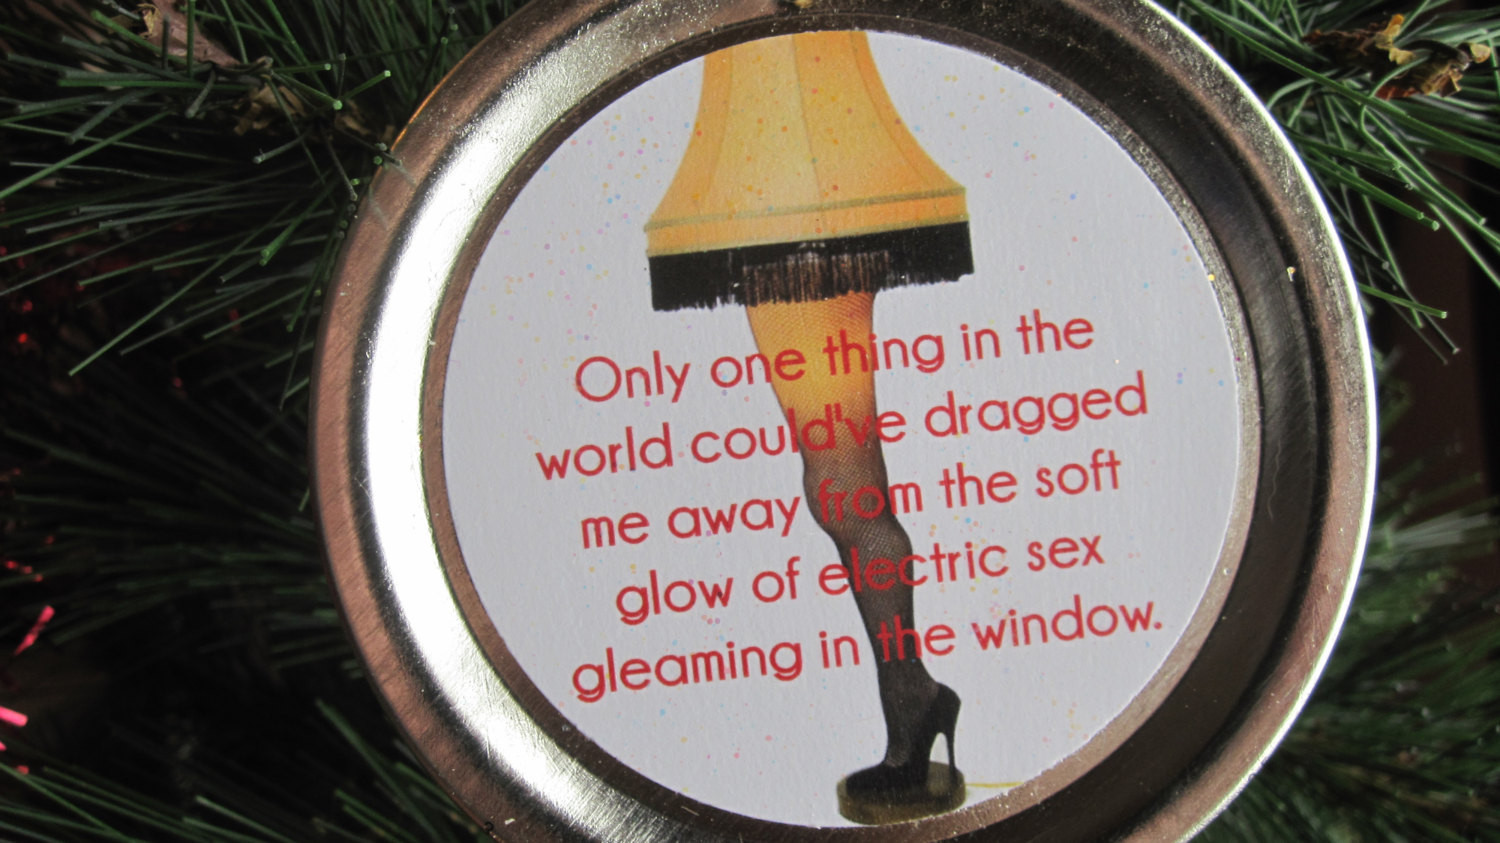 Christmas Story Leg Lamp Quotes
 A Christmas Story Ornament Funny Movie Quote by